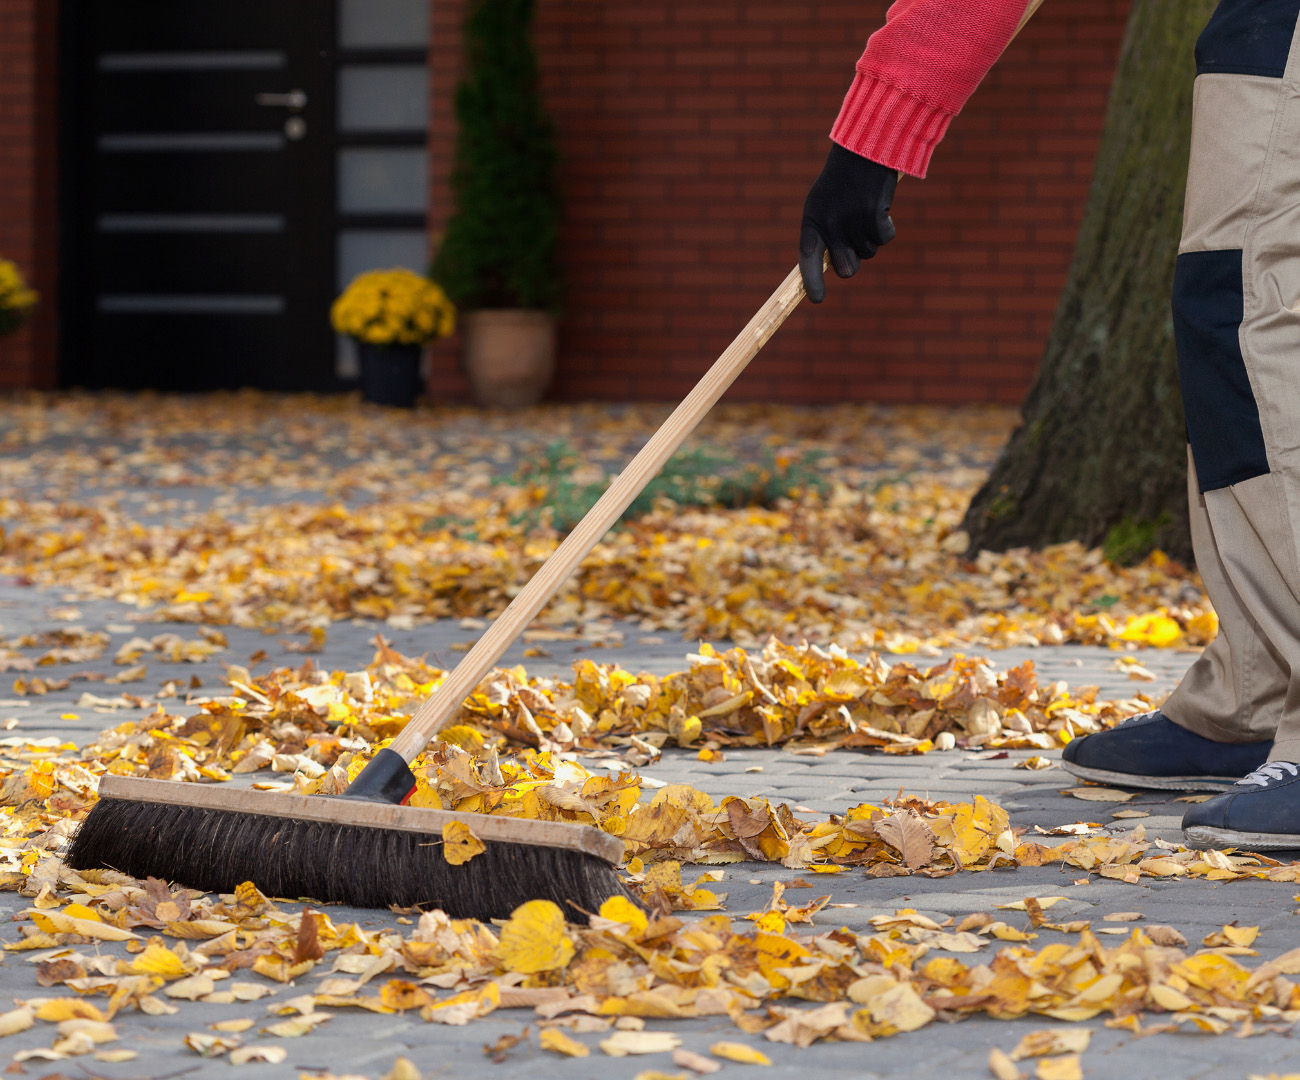 An image of someone brushing the leaves